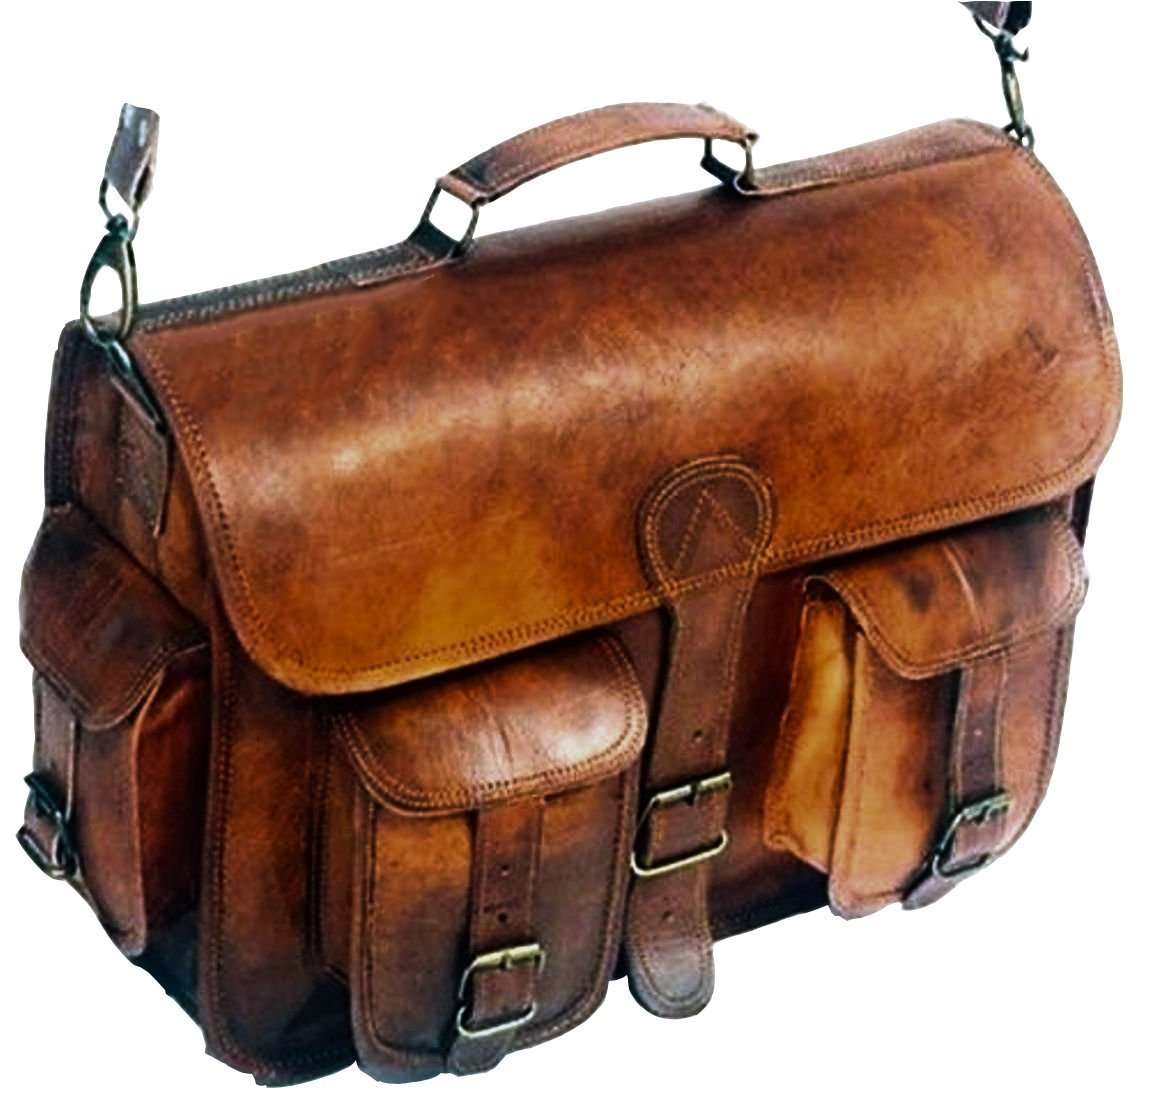 Leather Suitcase - Vintage Leather Suitcase Manufacturer from Rajkot